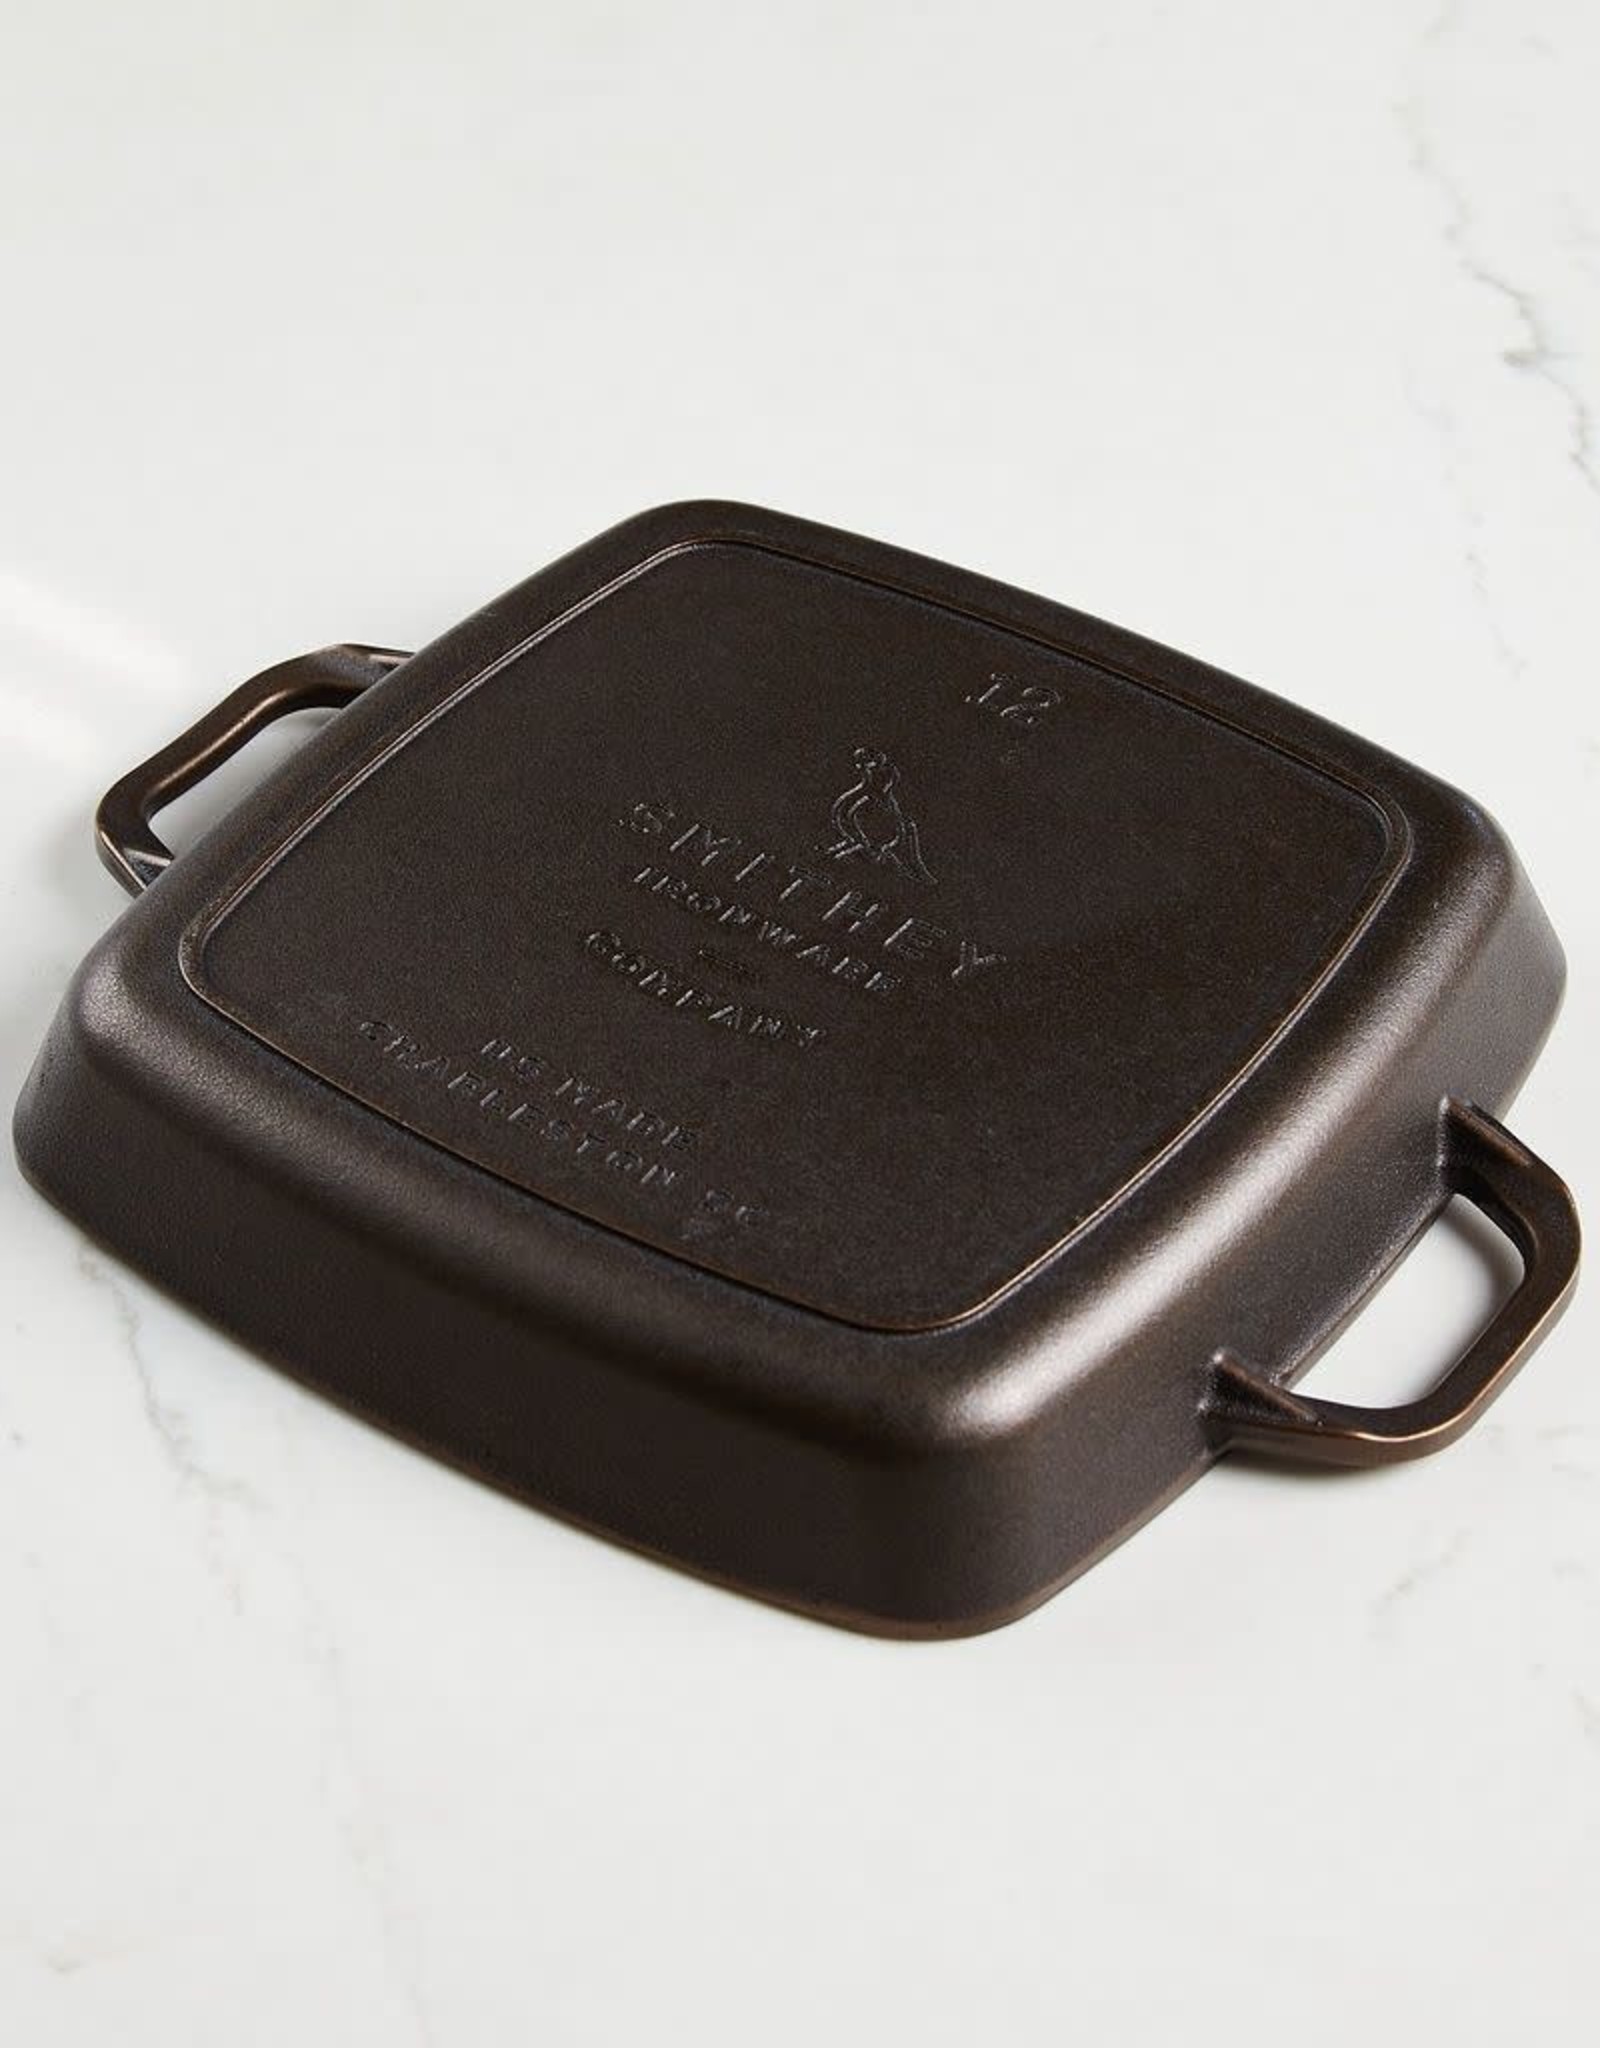 Smithey Ironware Co. No. 12 Grill Pan